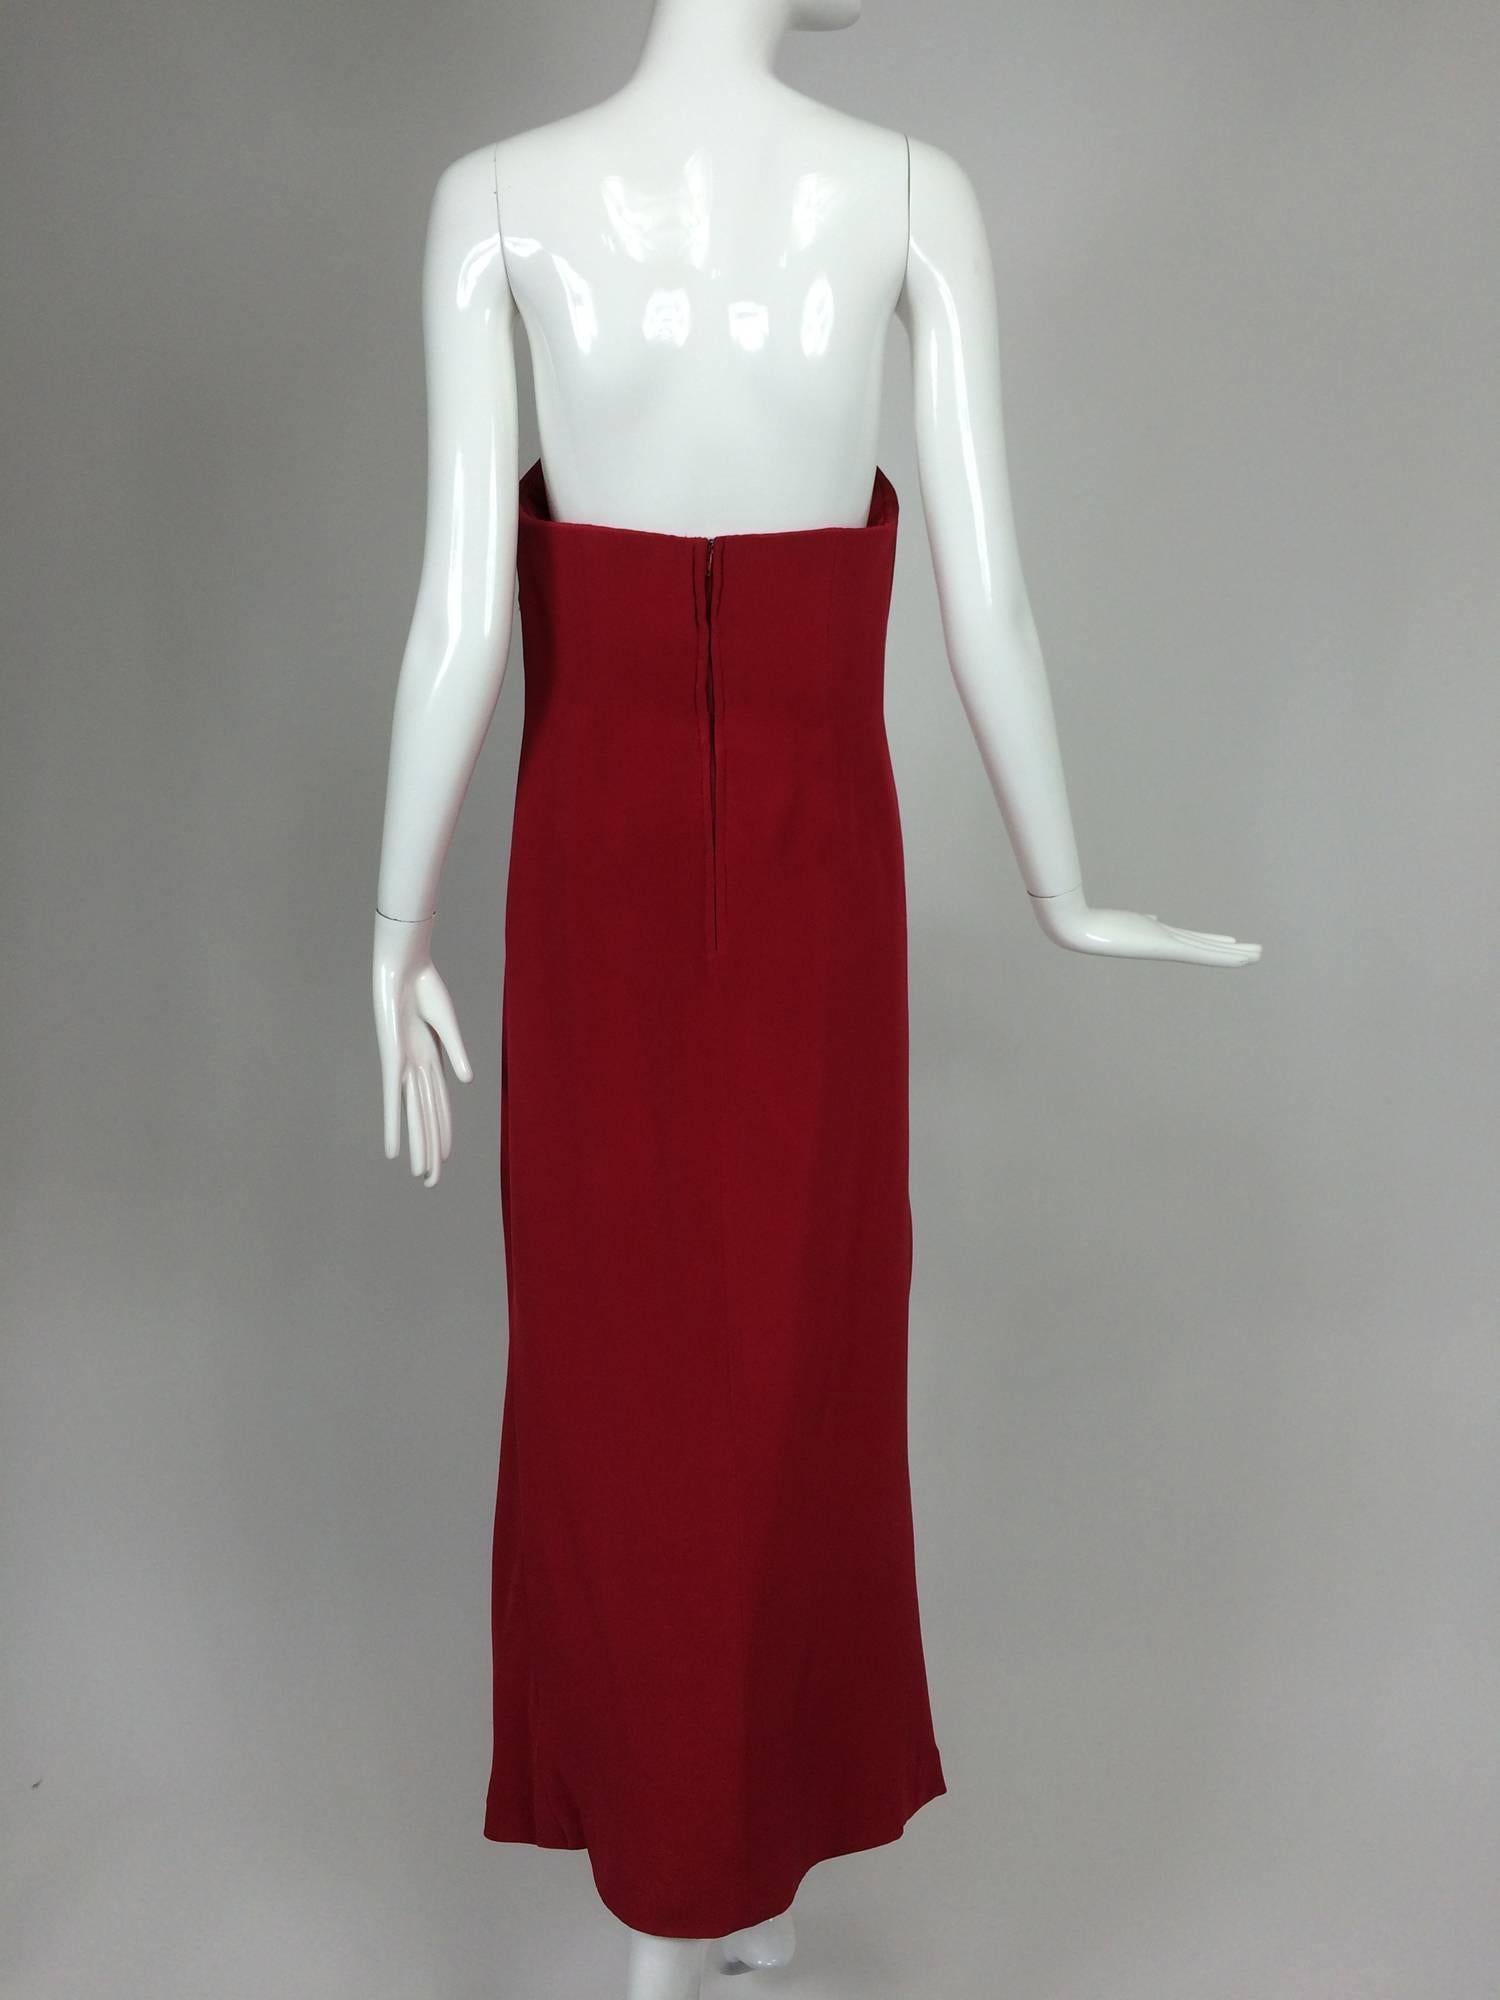 Fabulous John Anthony candy apple red silk strapless column gown 1980s 4